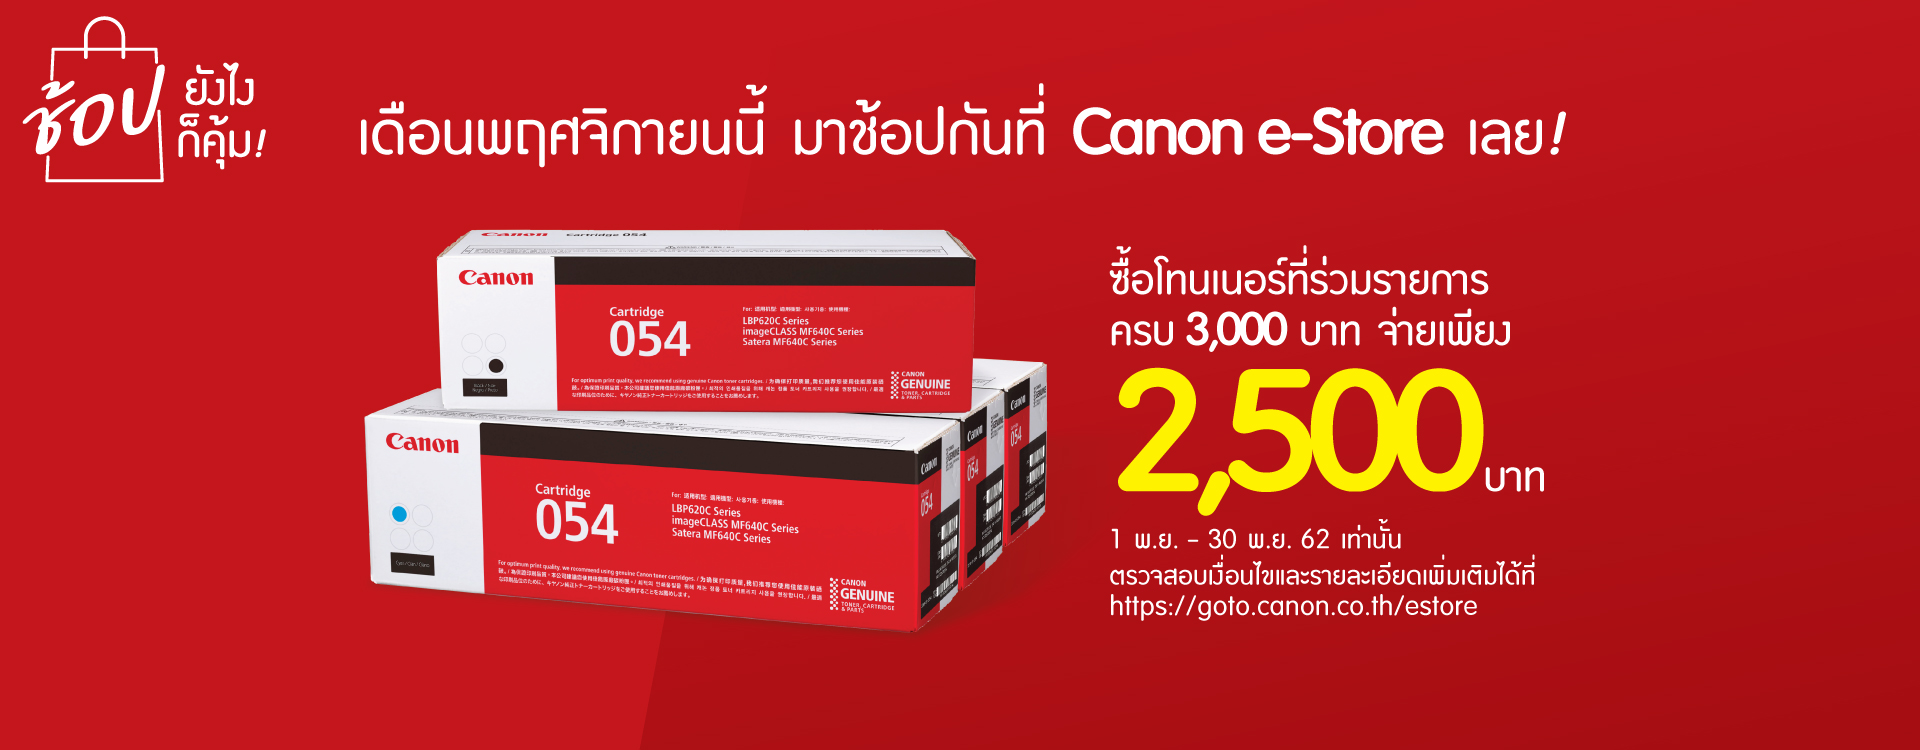 Home Canon Thailand - red team font roblox